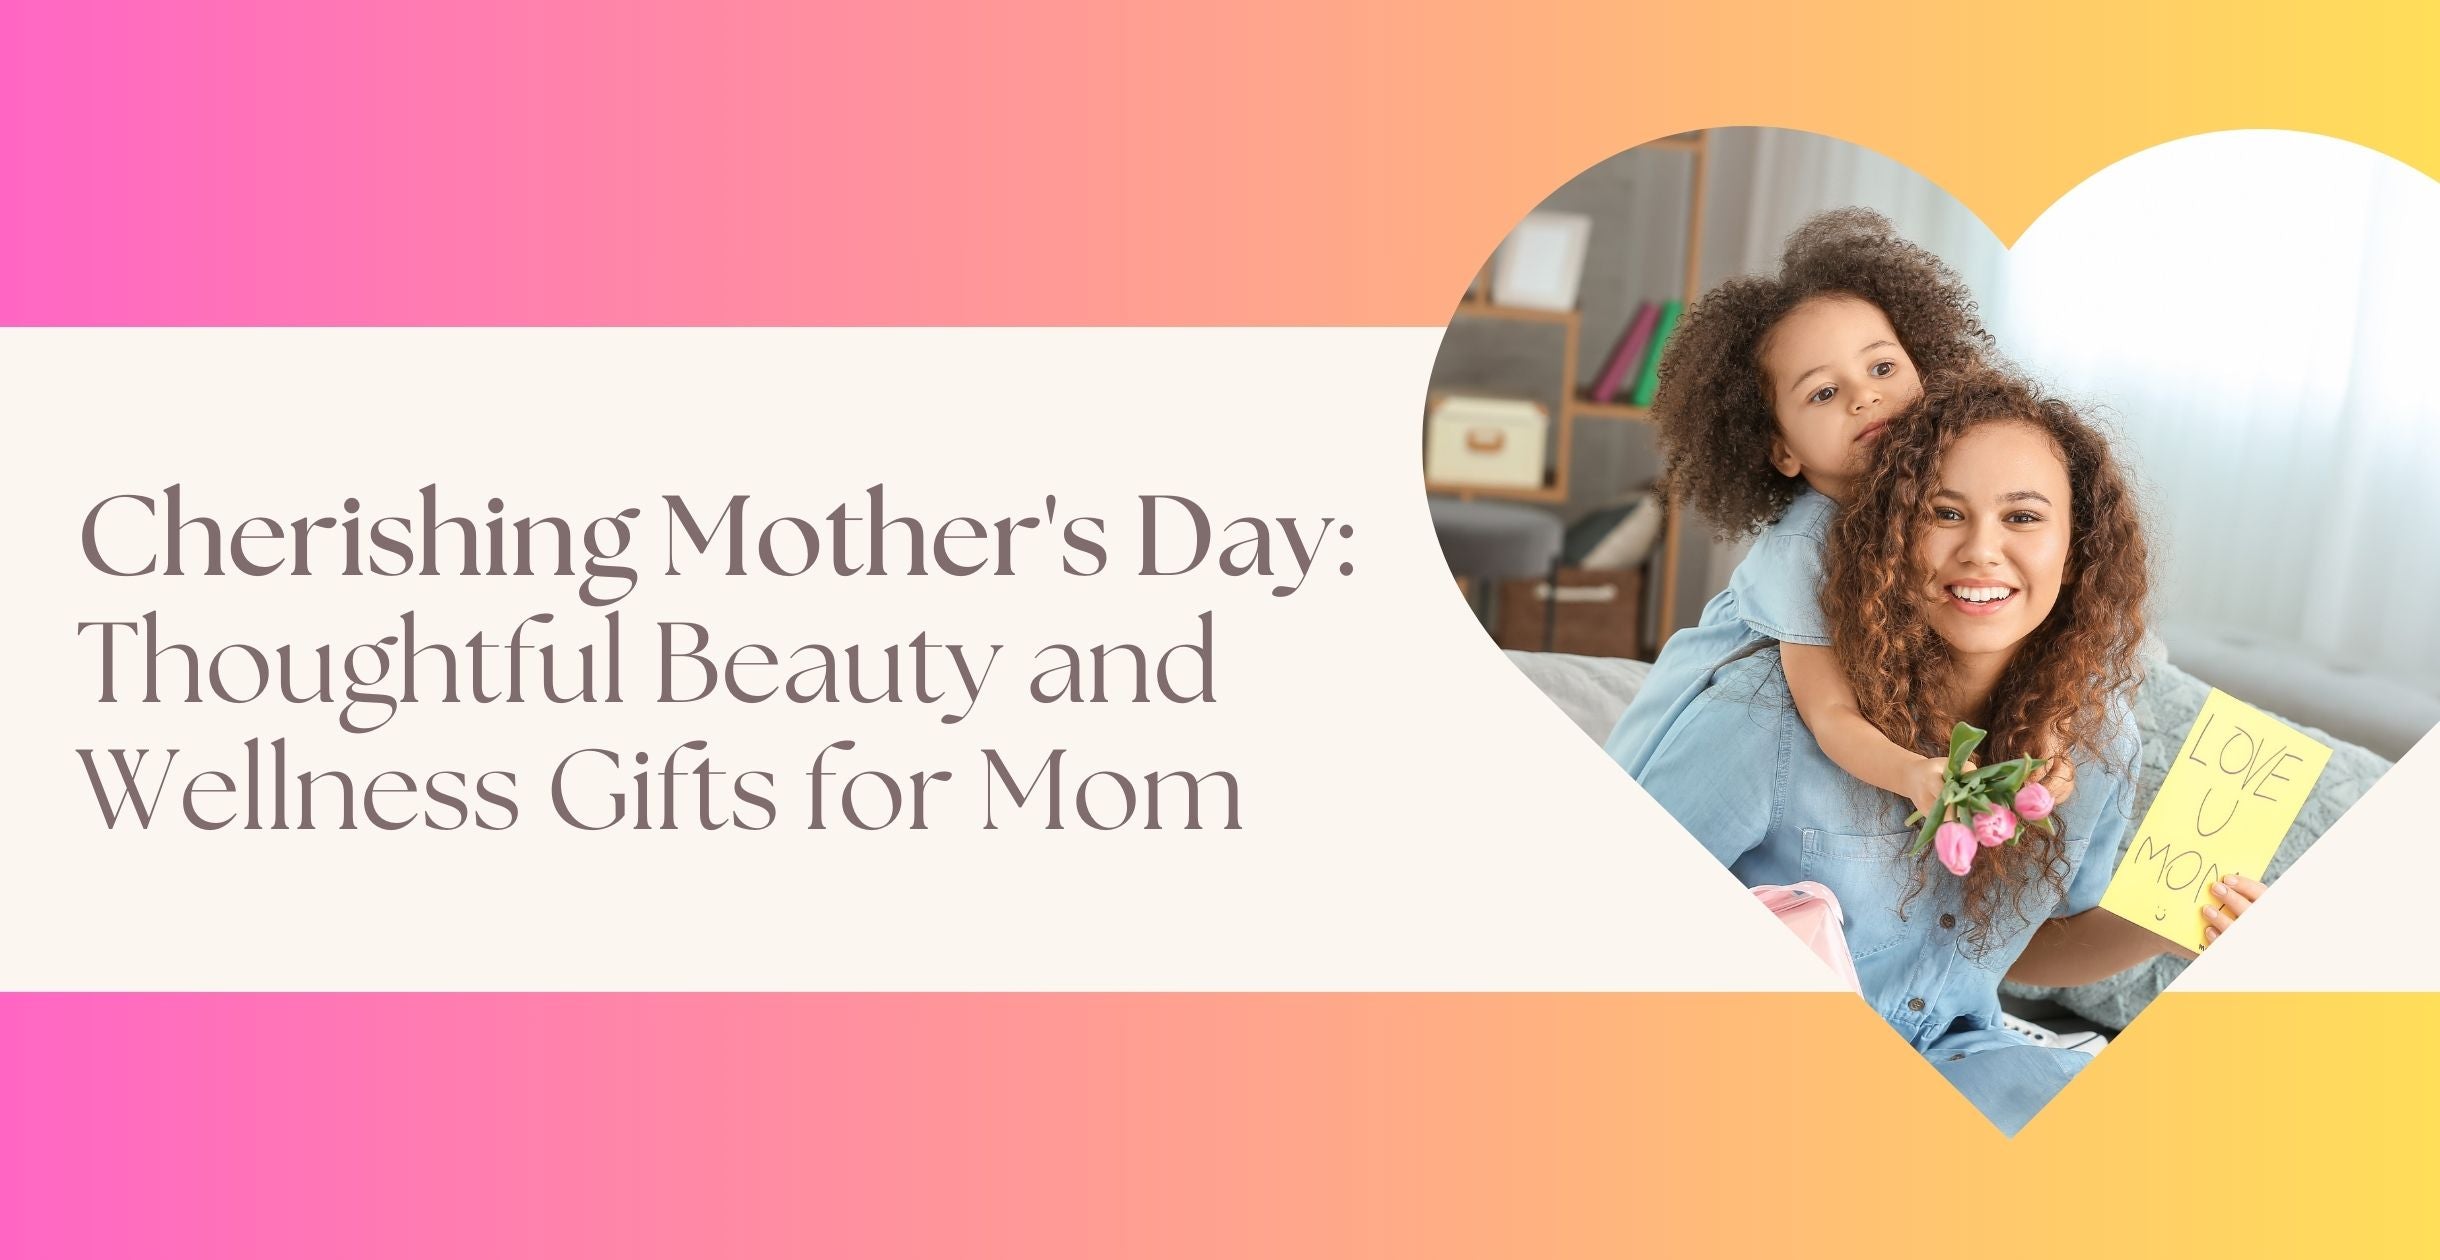 Cherishing Mother's Day: Thoughtful Beauty and Wellness Gifts for Mom